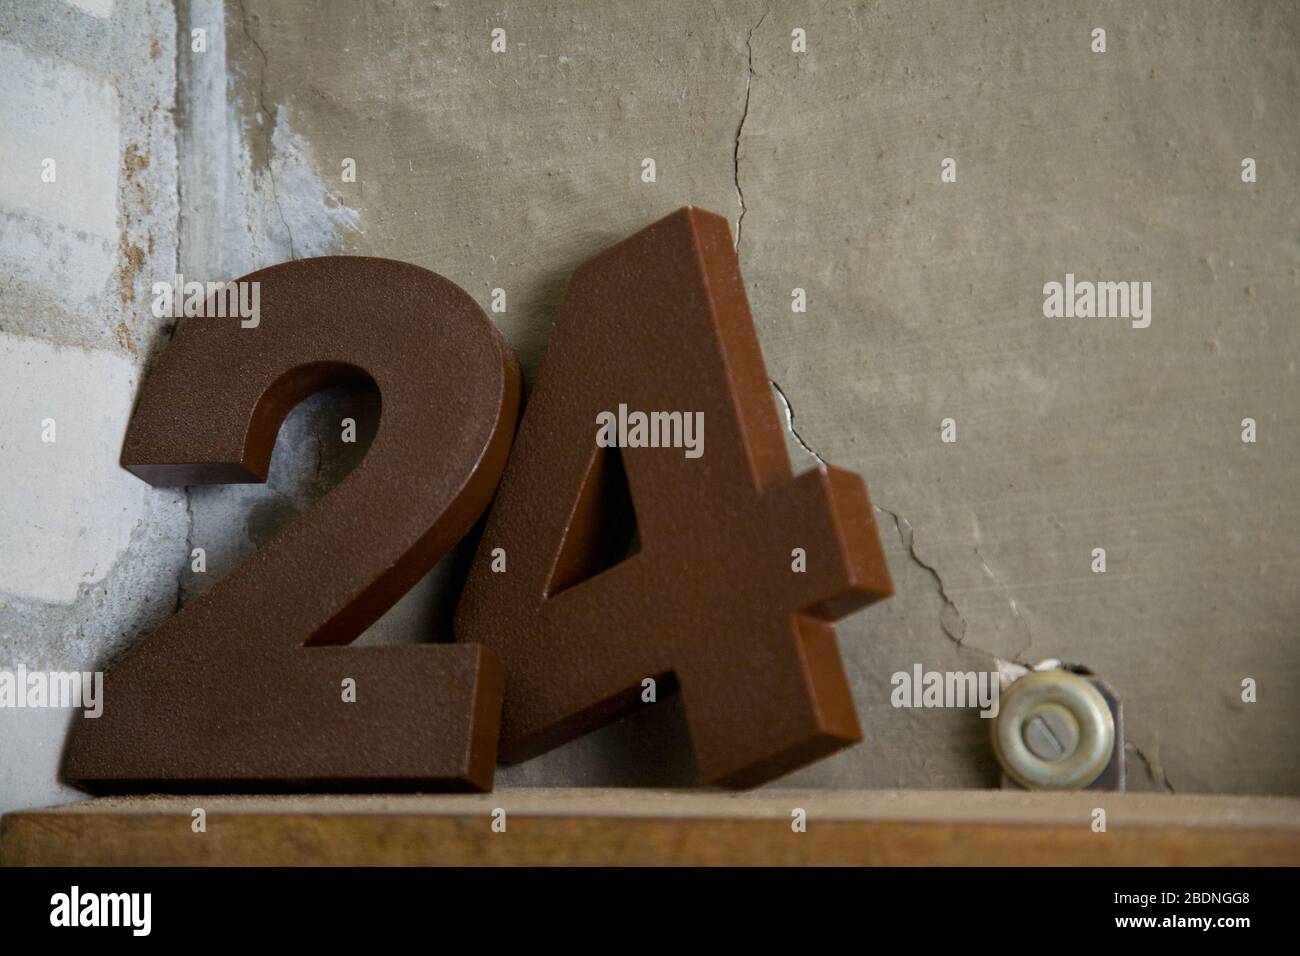 The number 24 as a metal number on a shelf Stock Photo